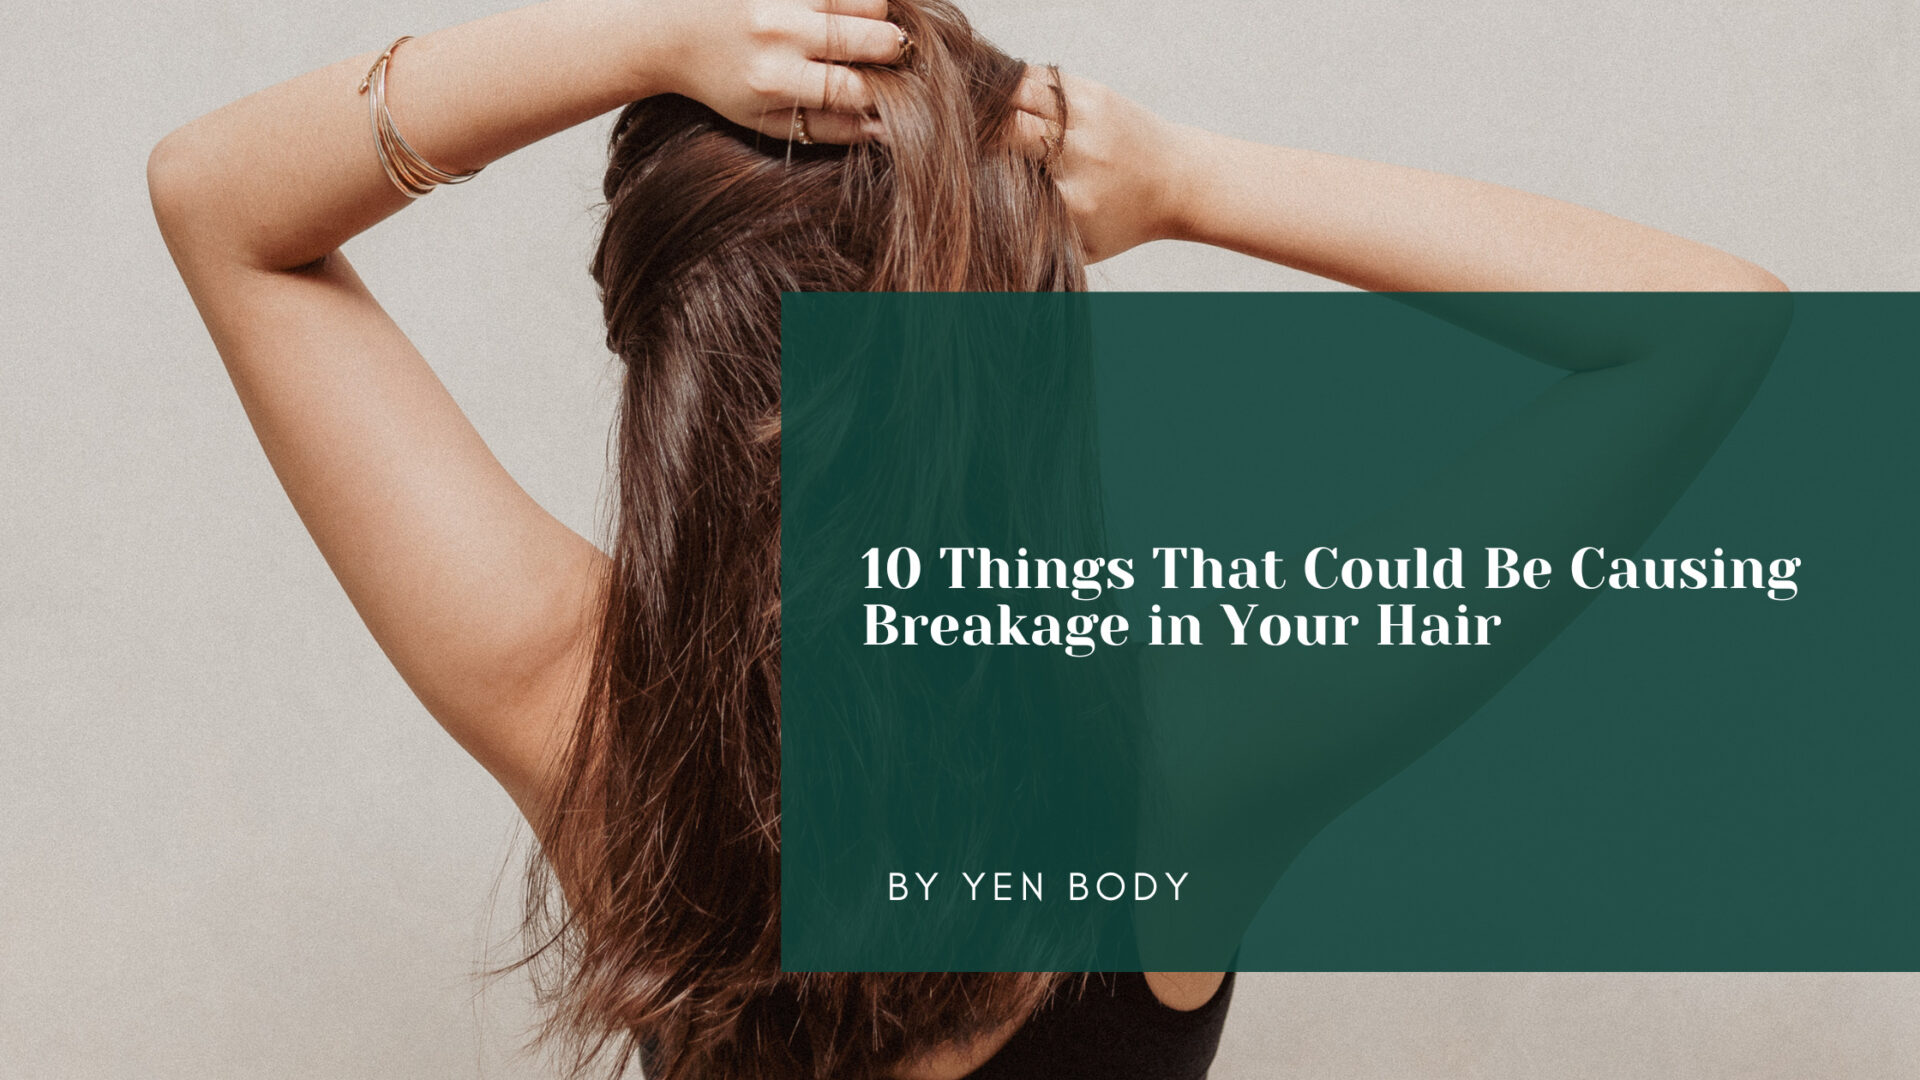 10 Things That Could Be Causing Breakage in Your Hair